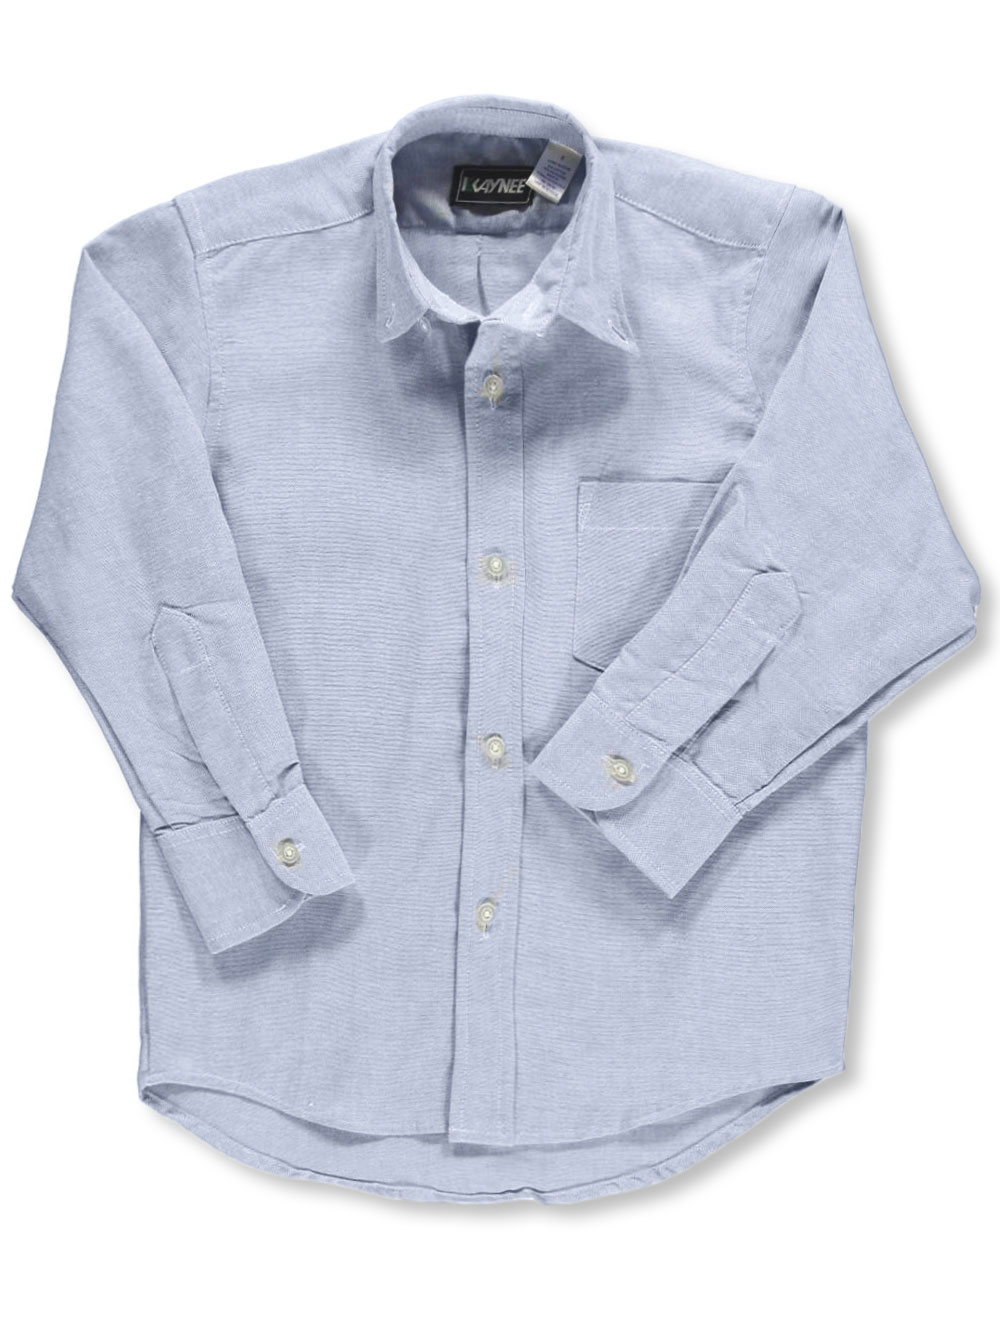 Size 18 Button-Downs for Boys